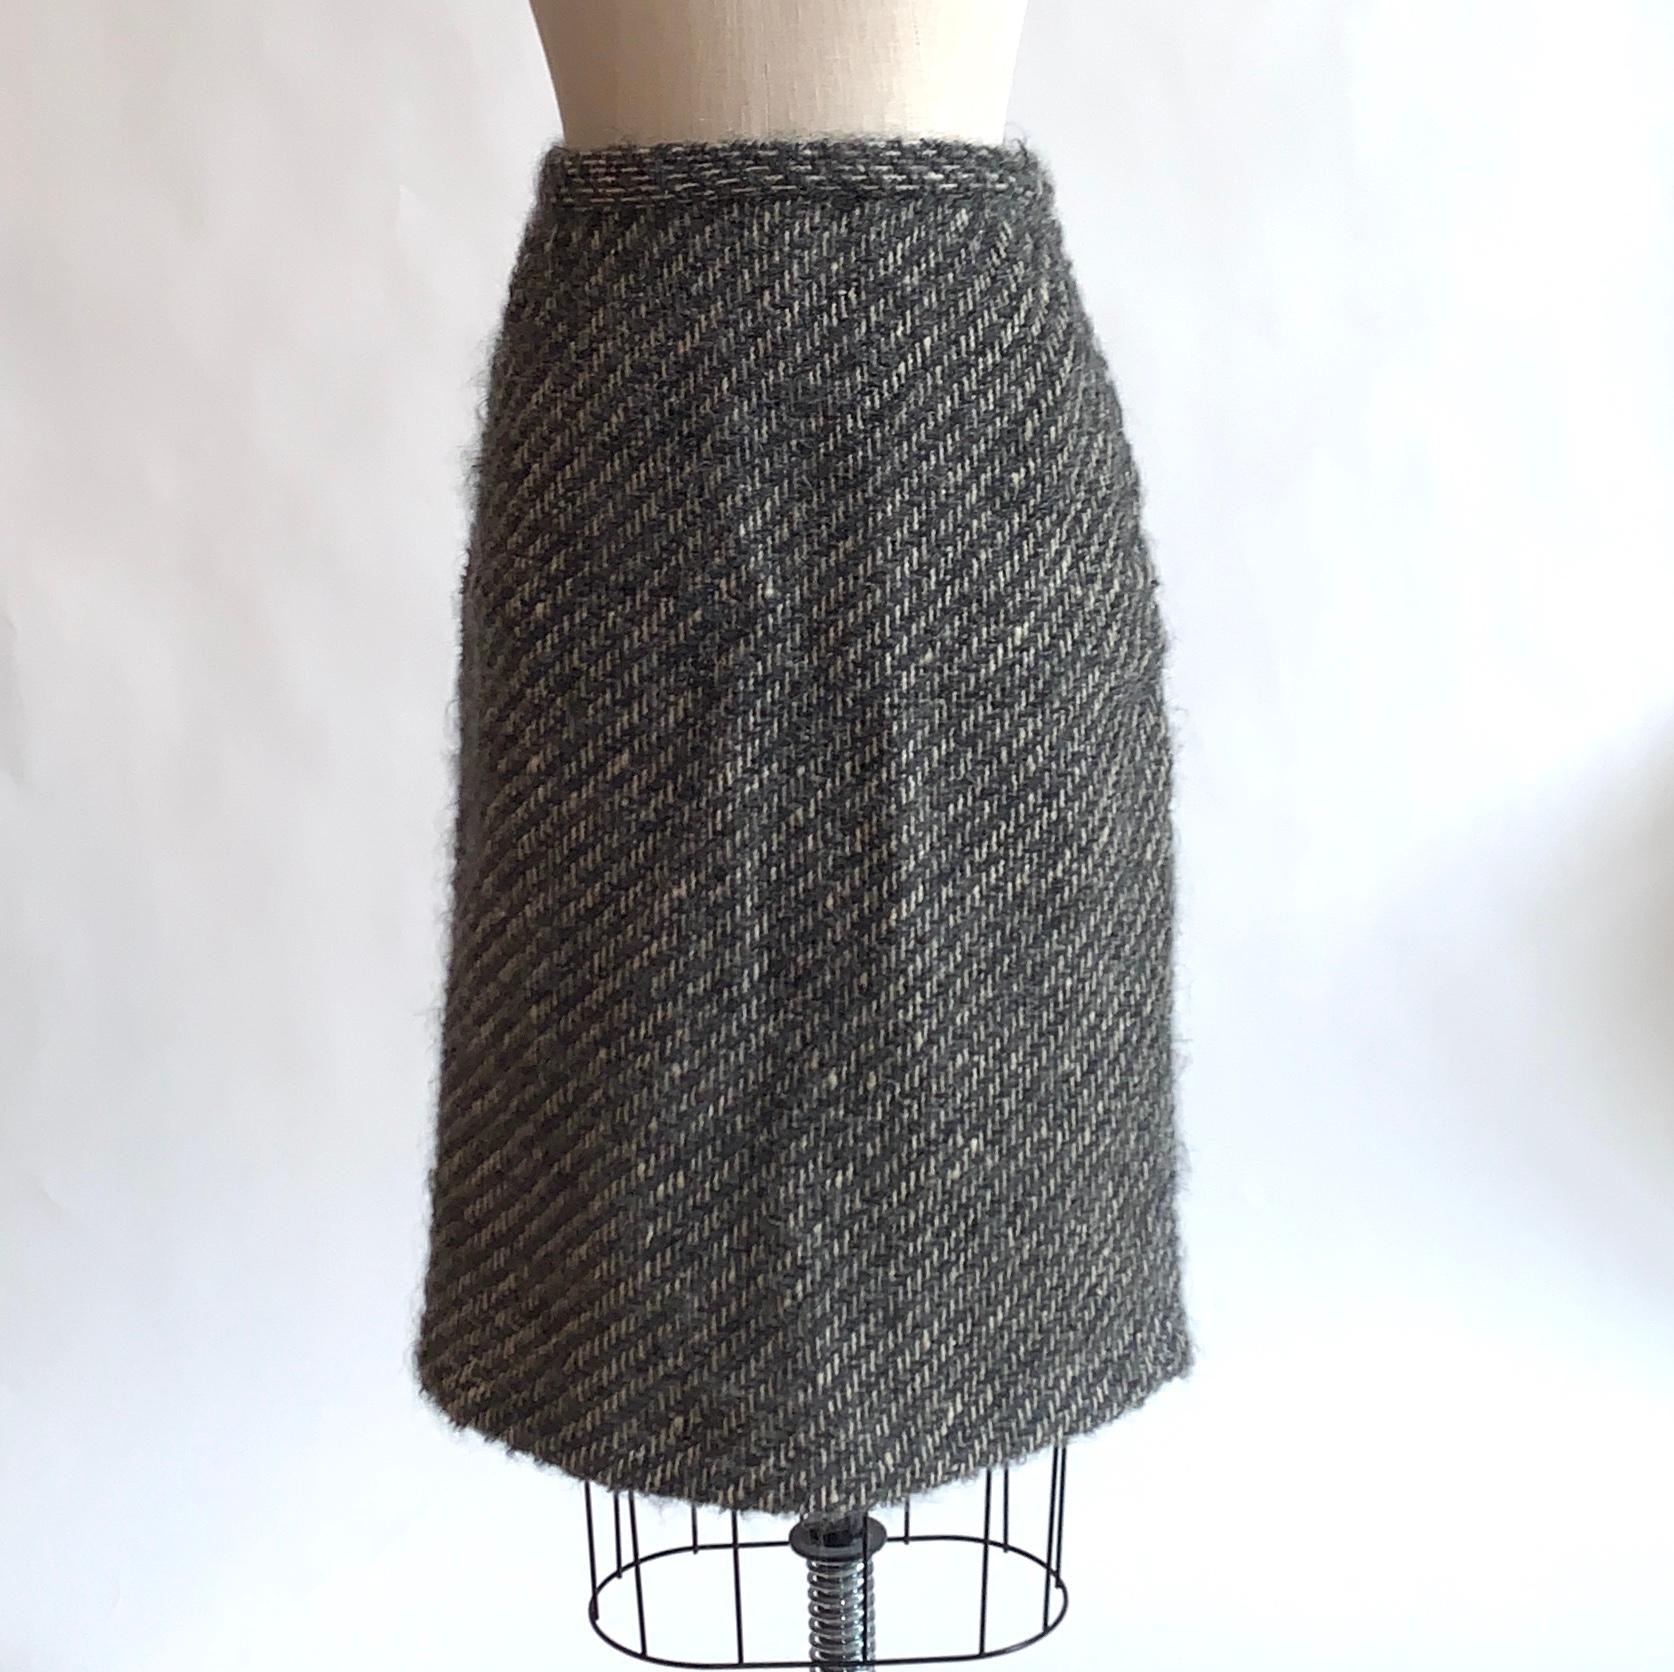 Sophie of Saks Sophie Gimbel Grey 1960s Skirt Suit in Grey and White Fuzzy Weave For Sale 3